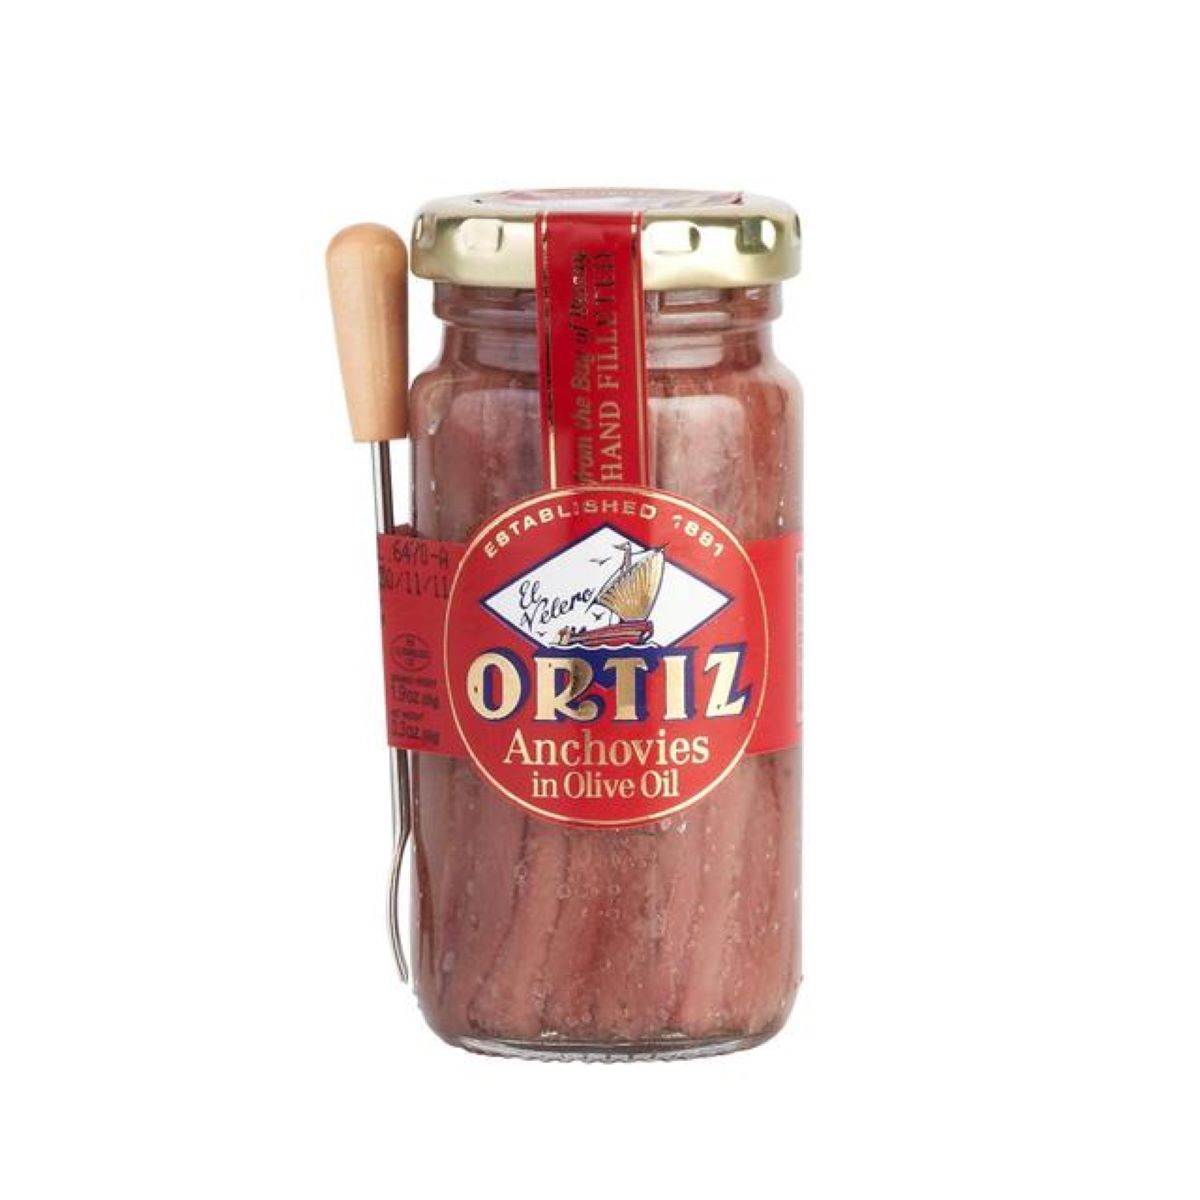 Ortiz Anchovy Fillets in Olive Oil 95g